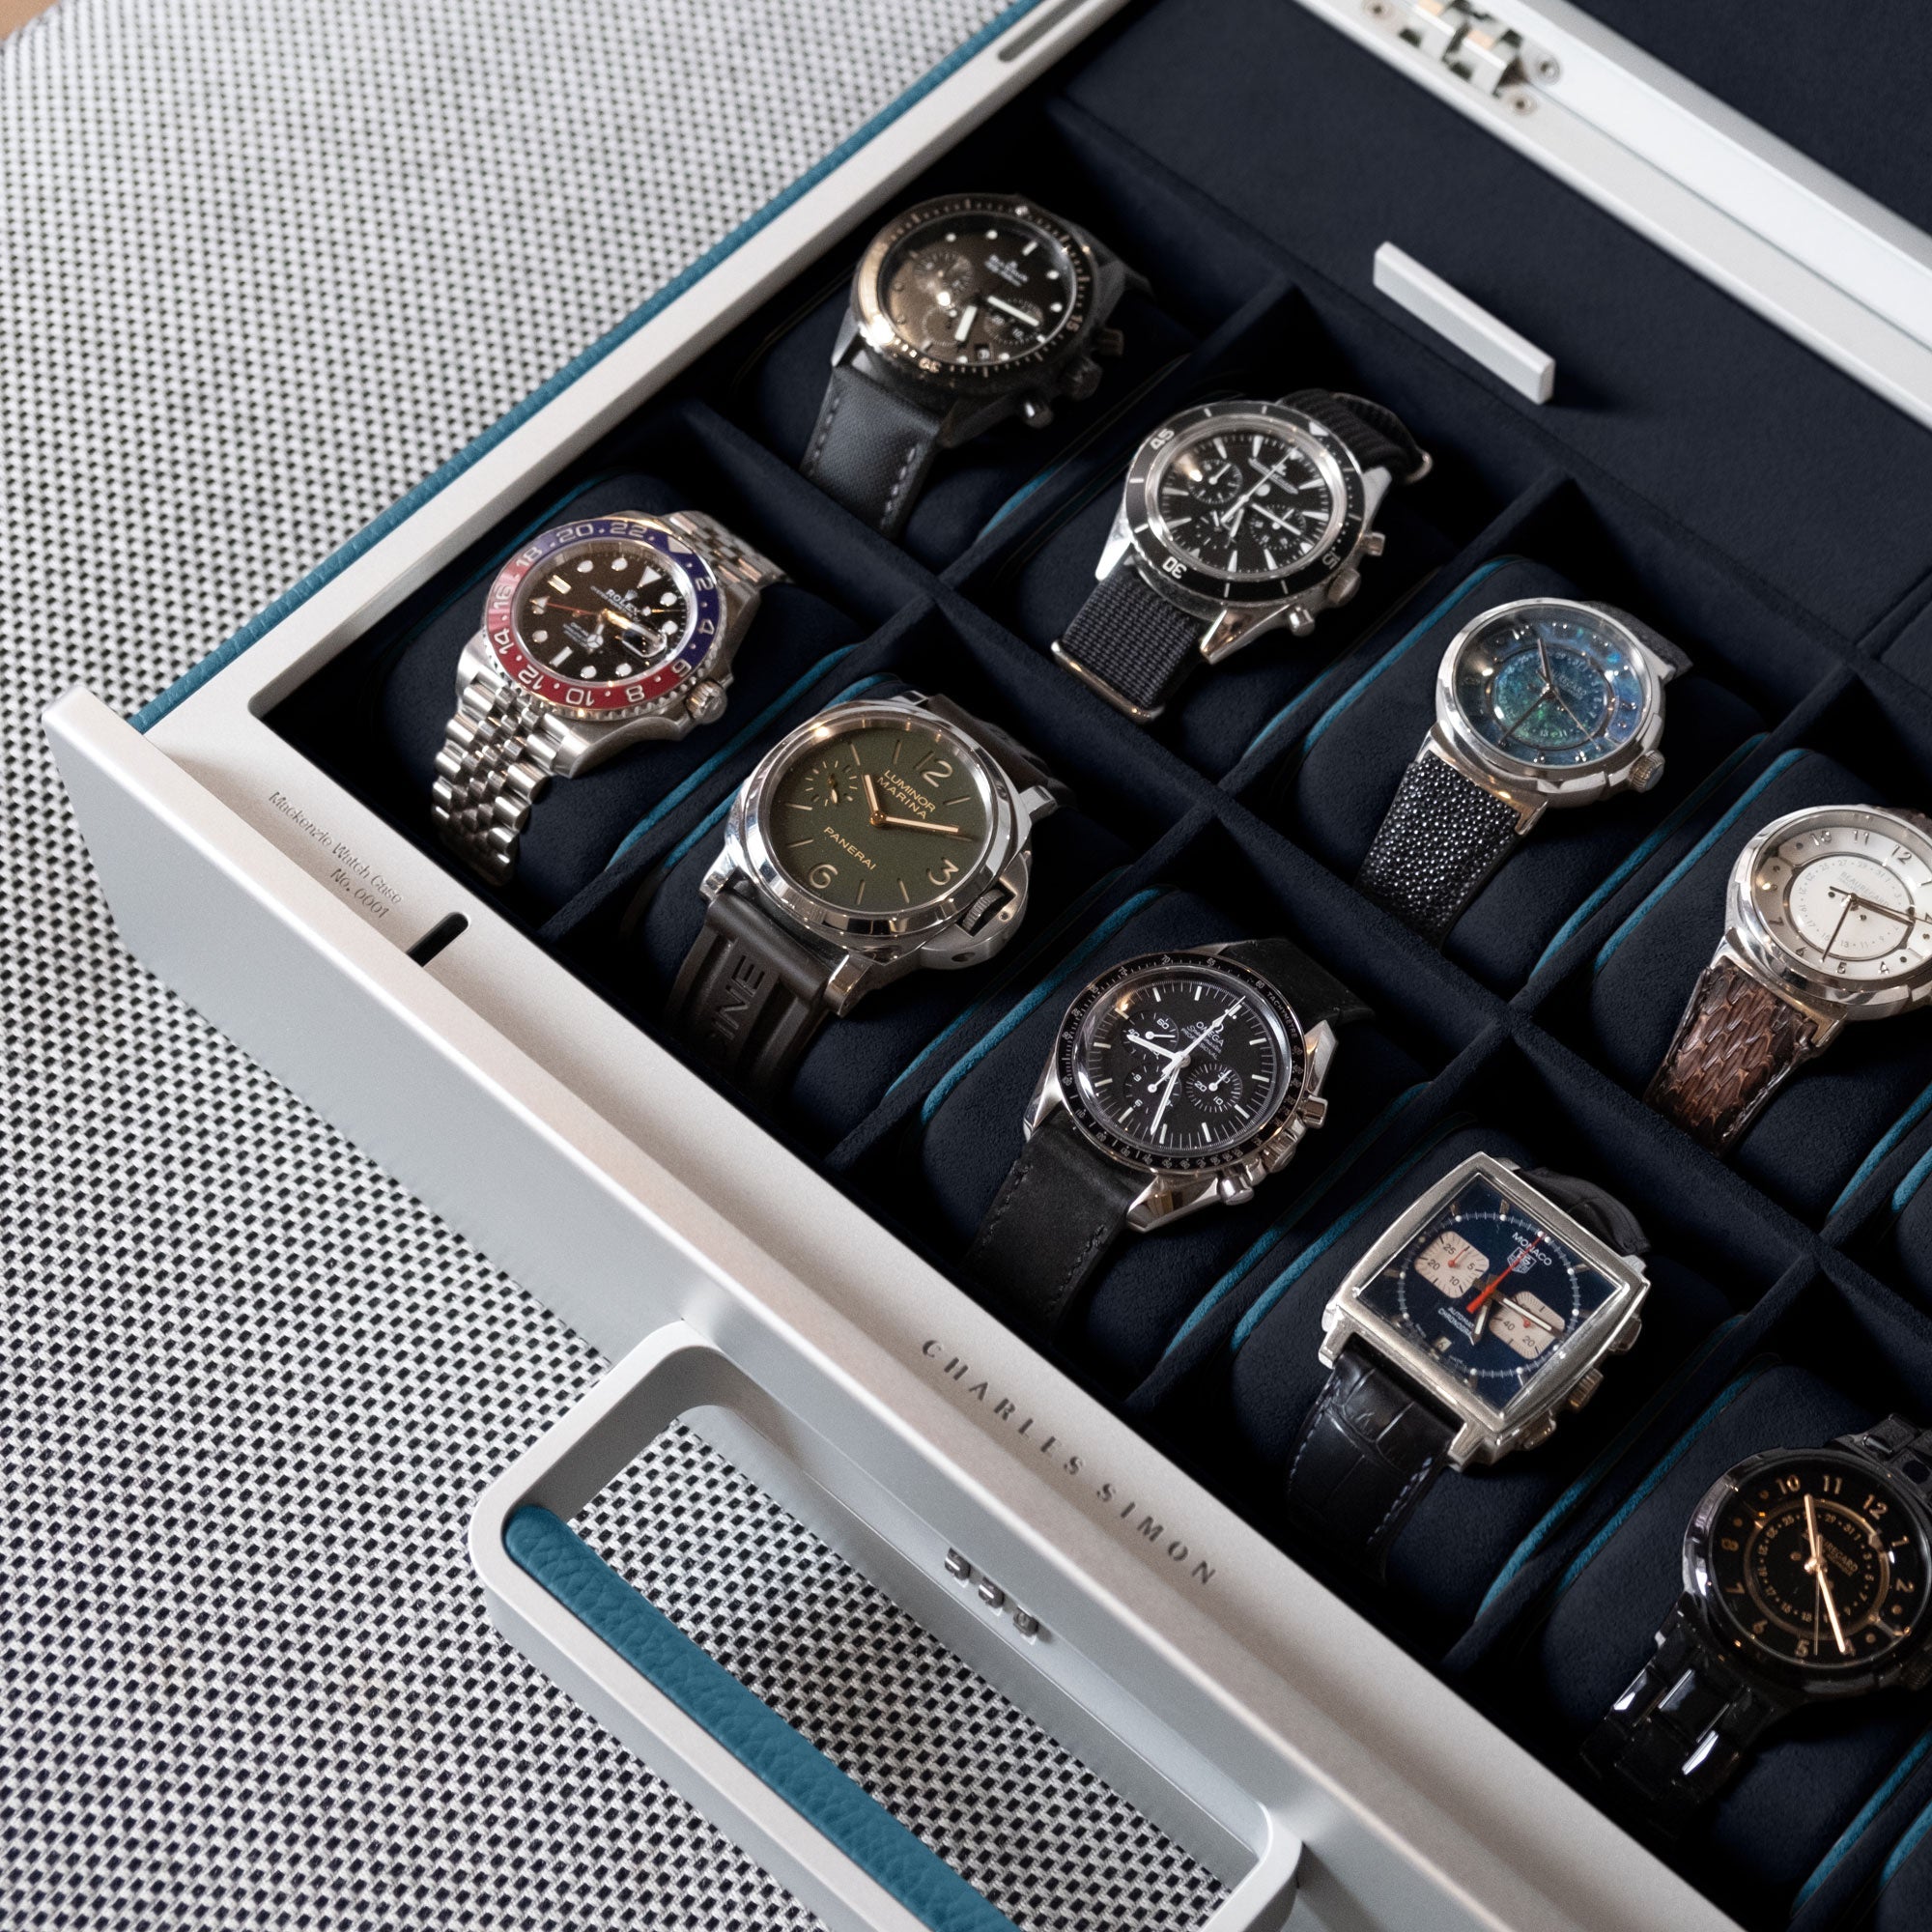 Lifestyle shot of Mackenzie 12 watch briefcase filled with luxury watches including Rolex, Panerai and Omega